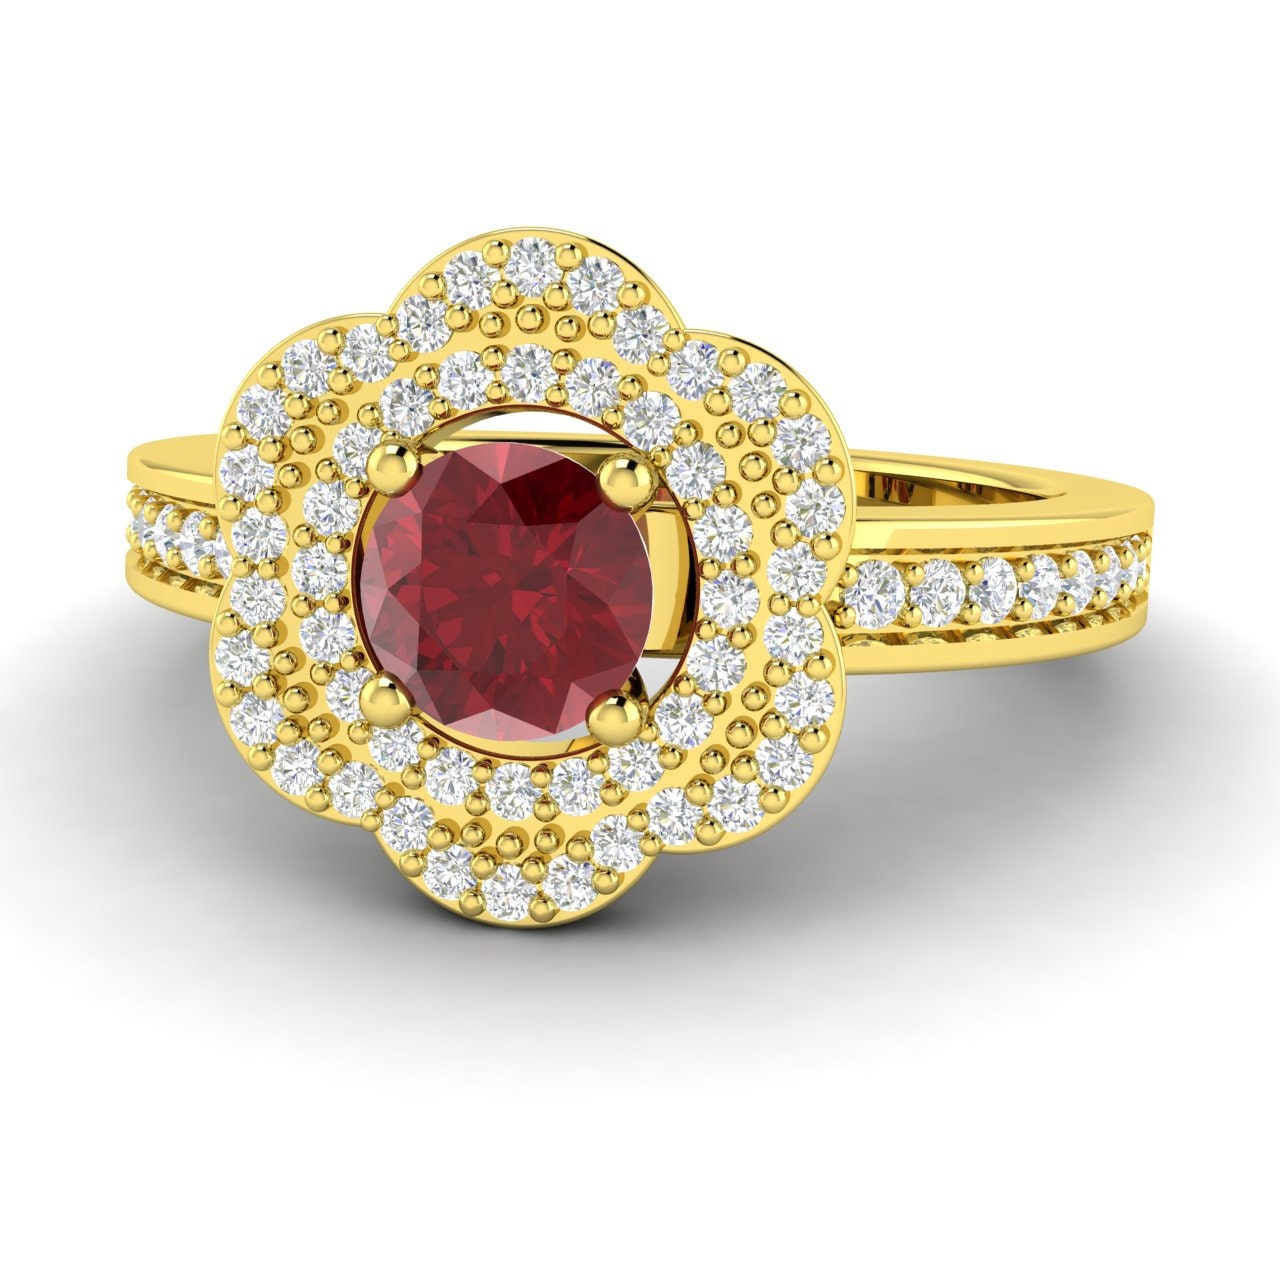 Floral Ruby Ring with Diamond in 14K Yellow Gold by Diamondere